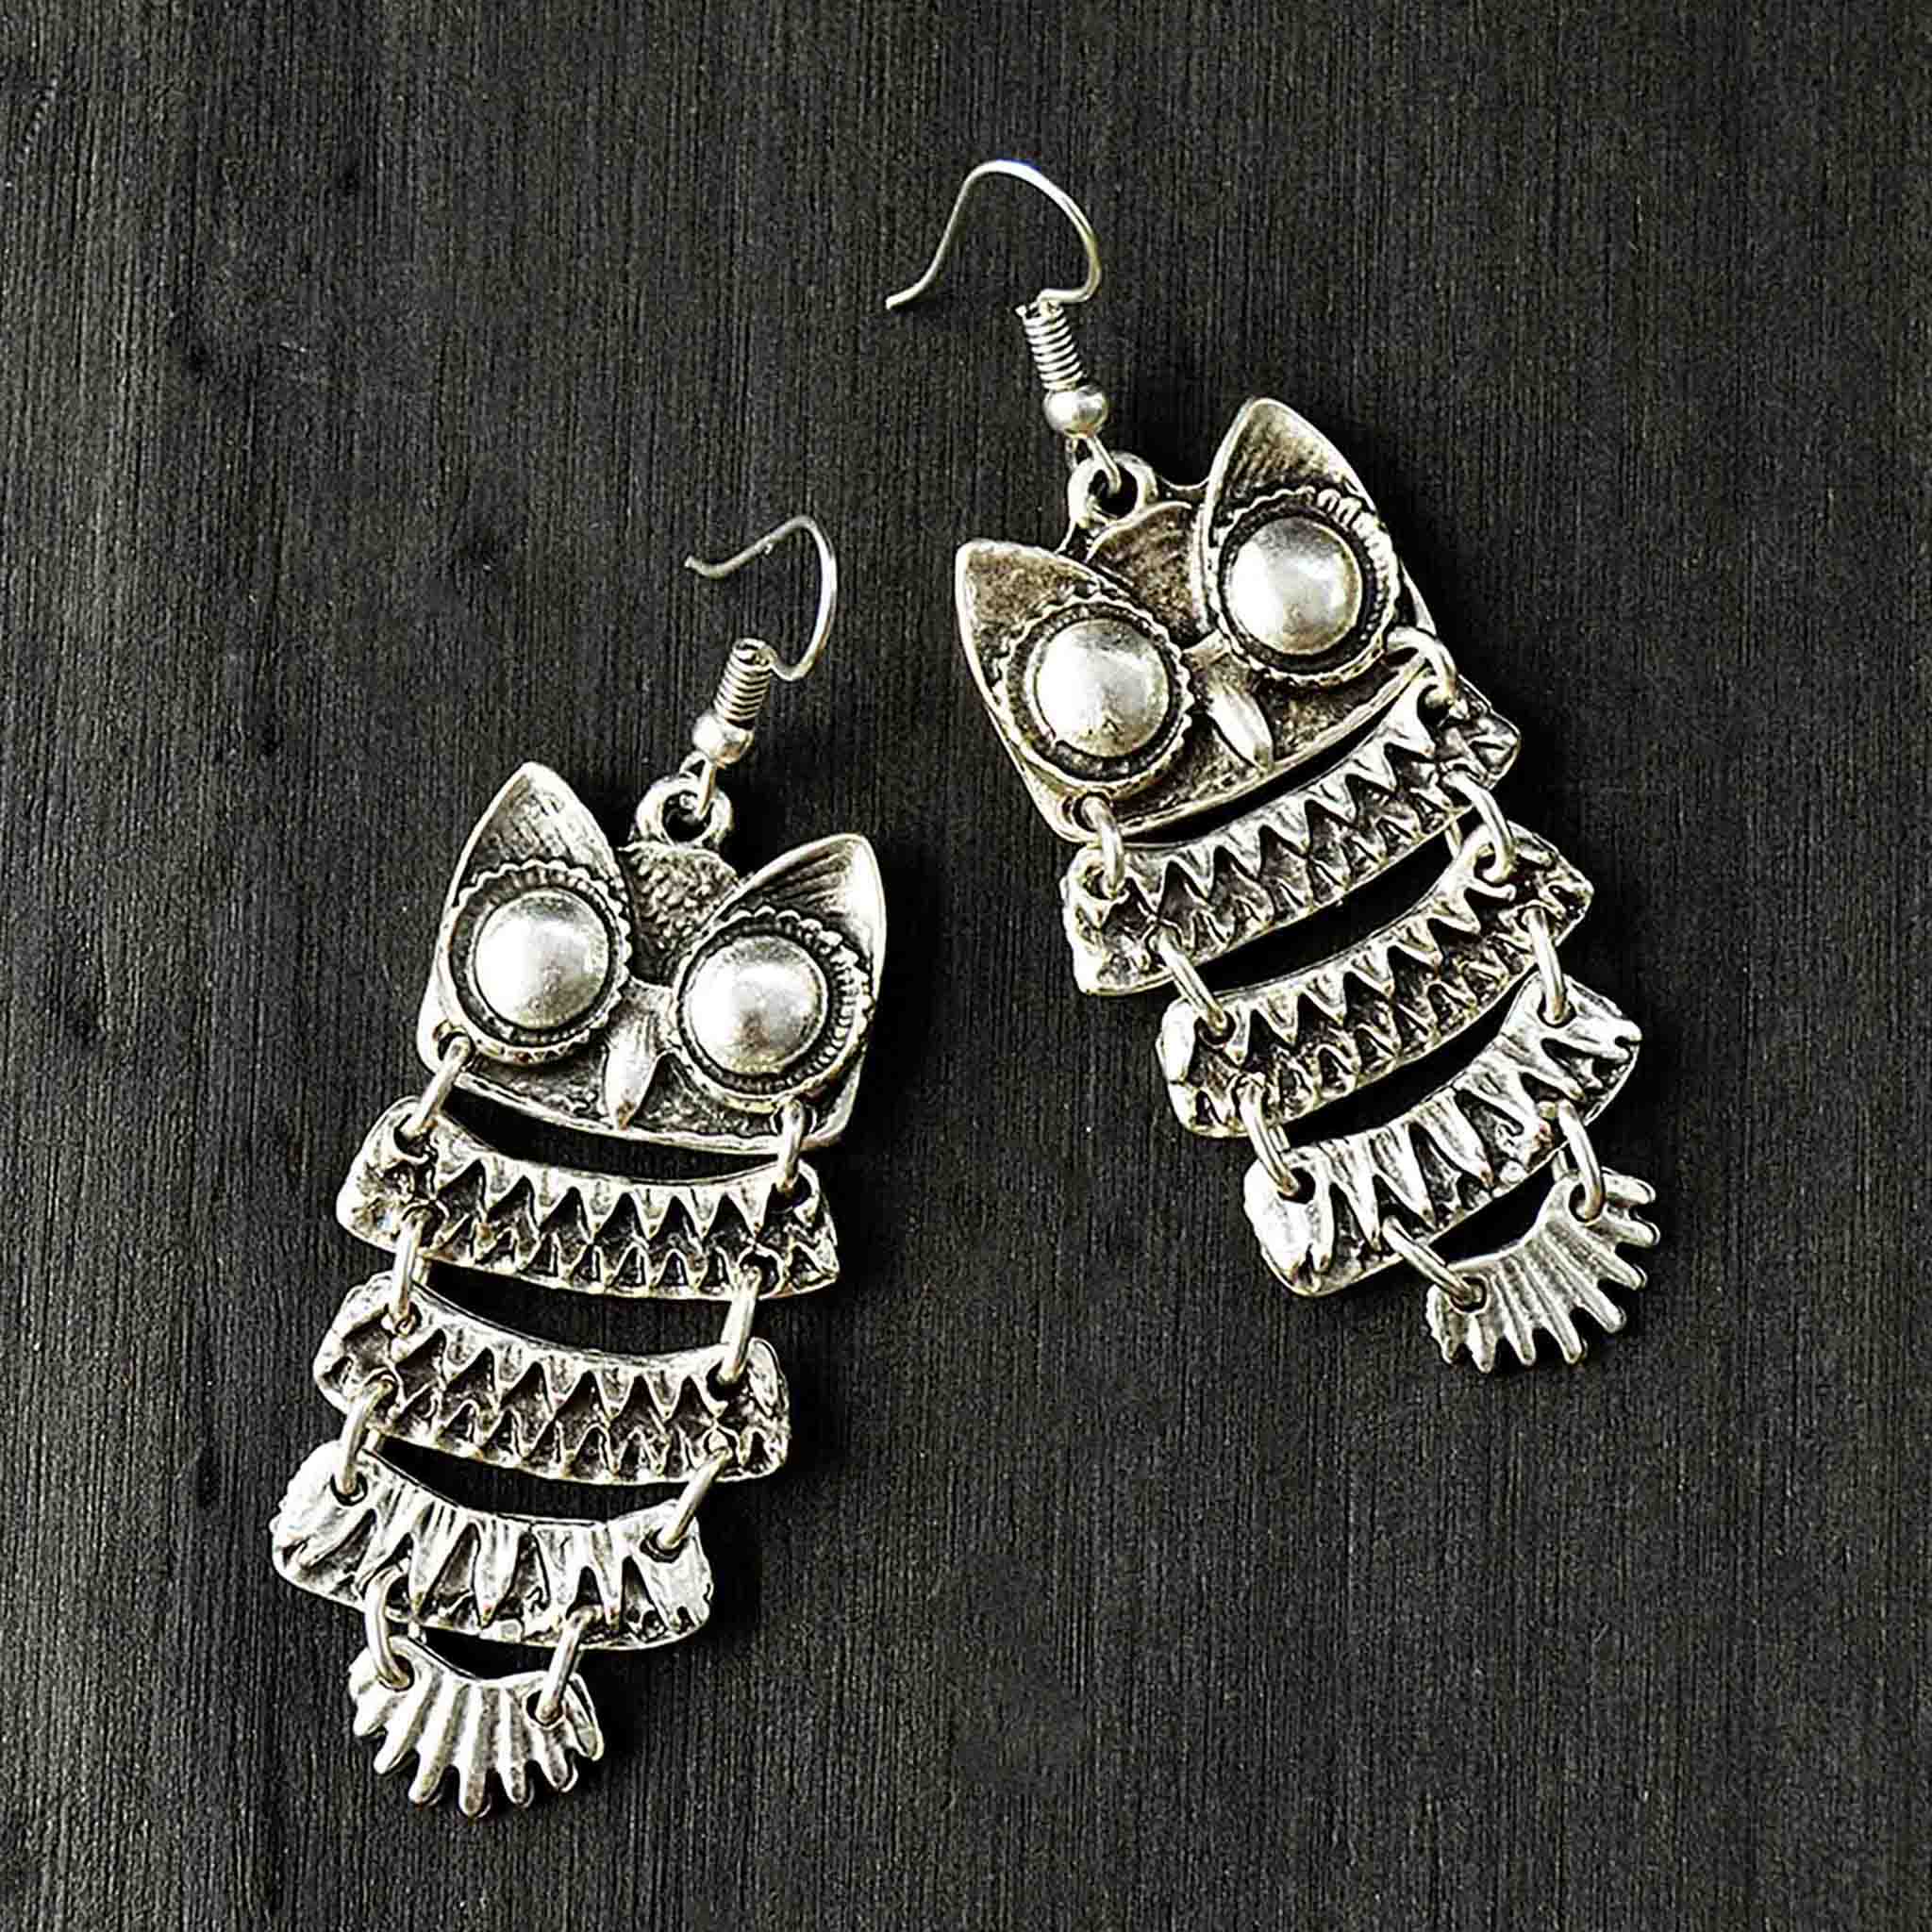 Silver hanging owl earrings on black background